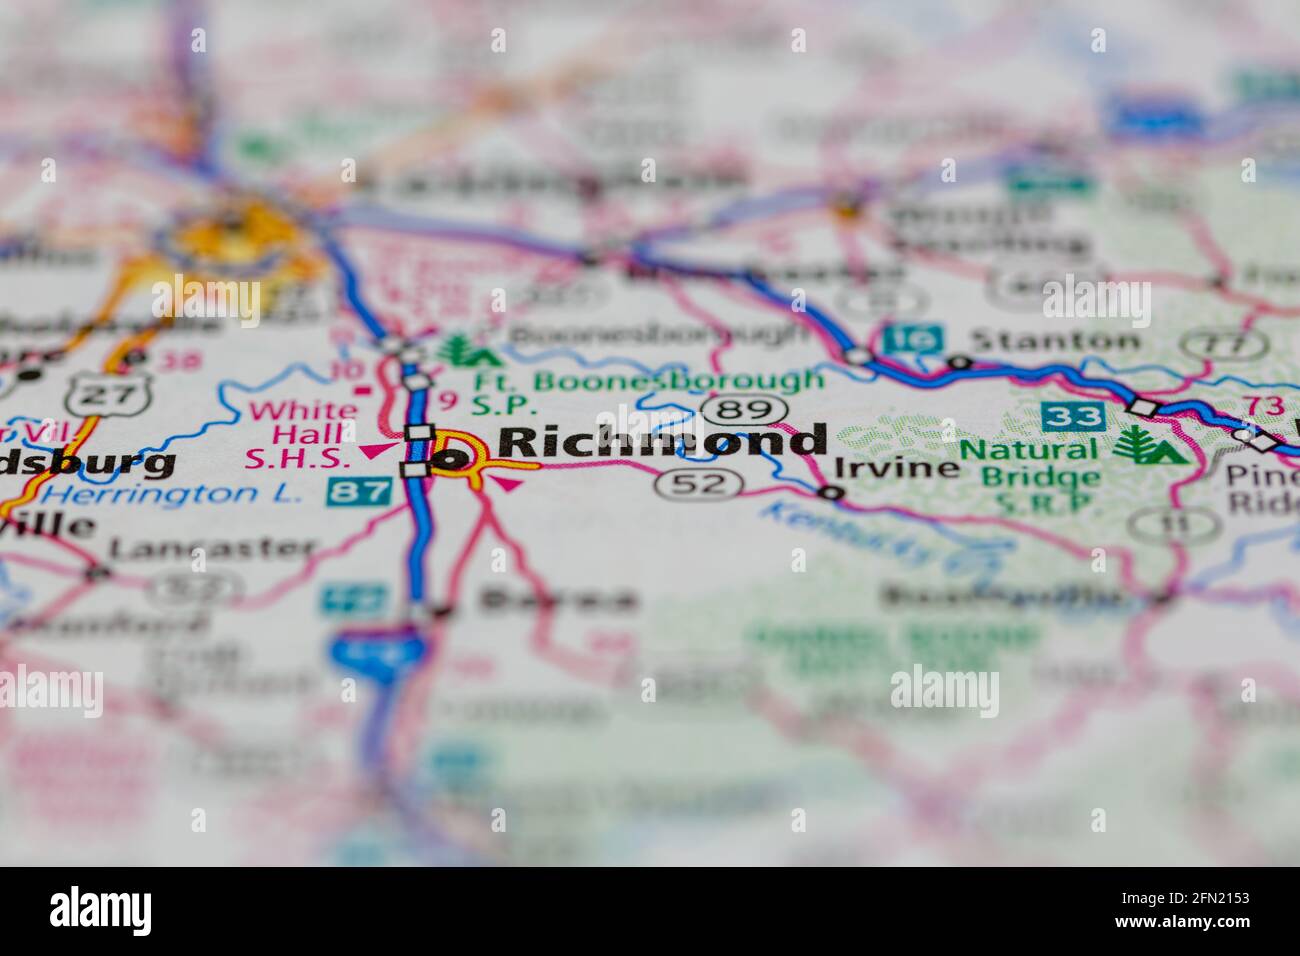 Richmond Kentucky USA shown on a Geography map or road map Stock Photo